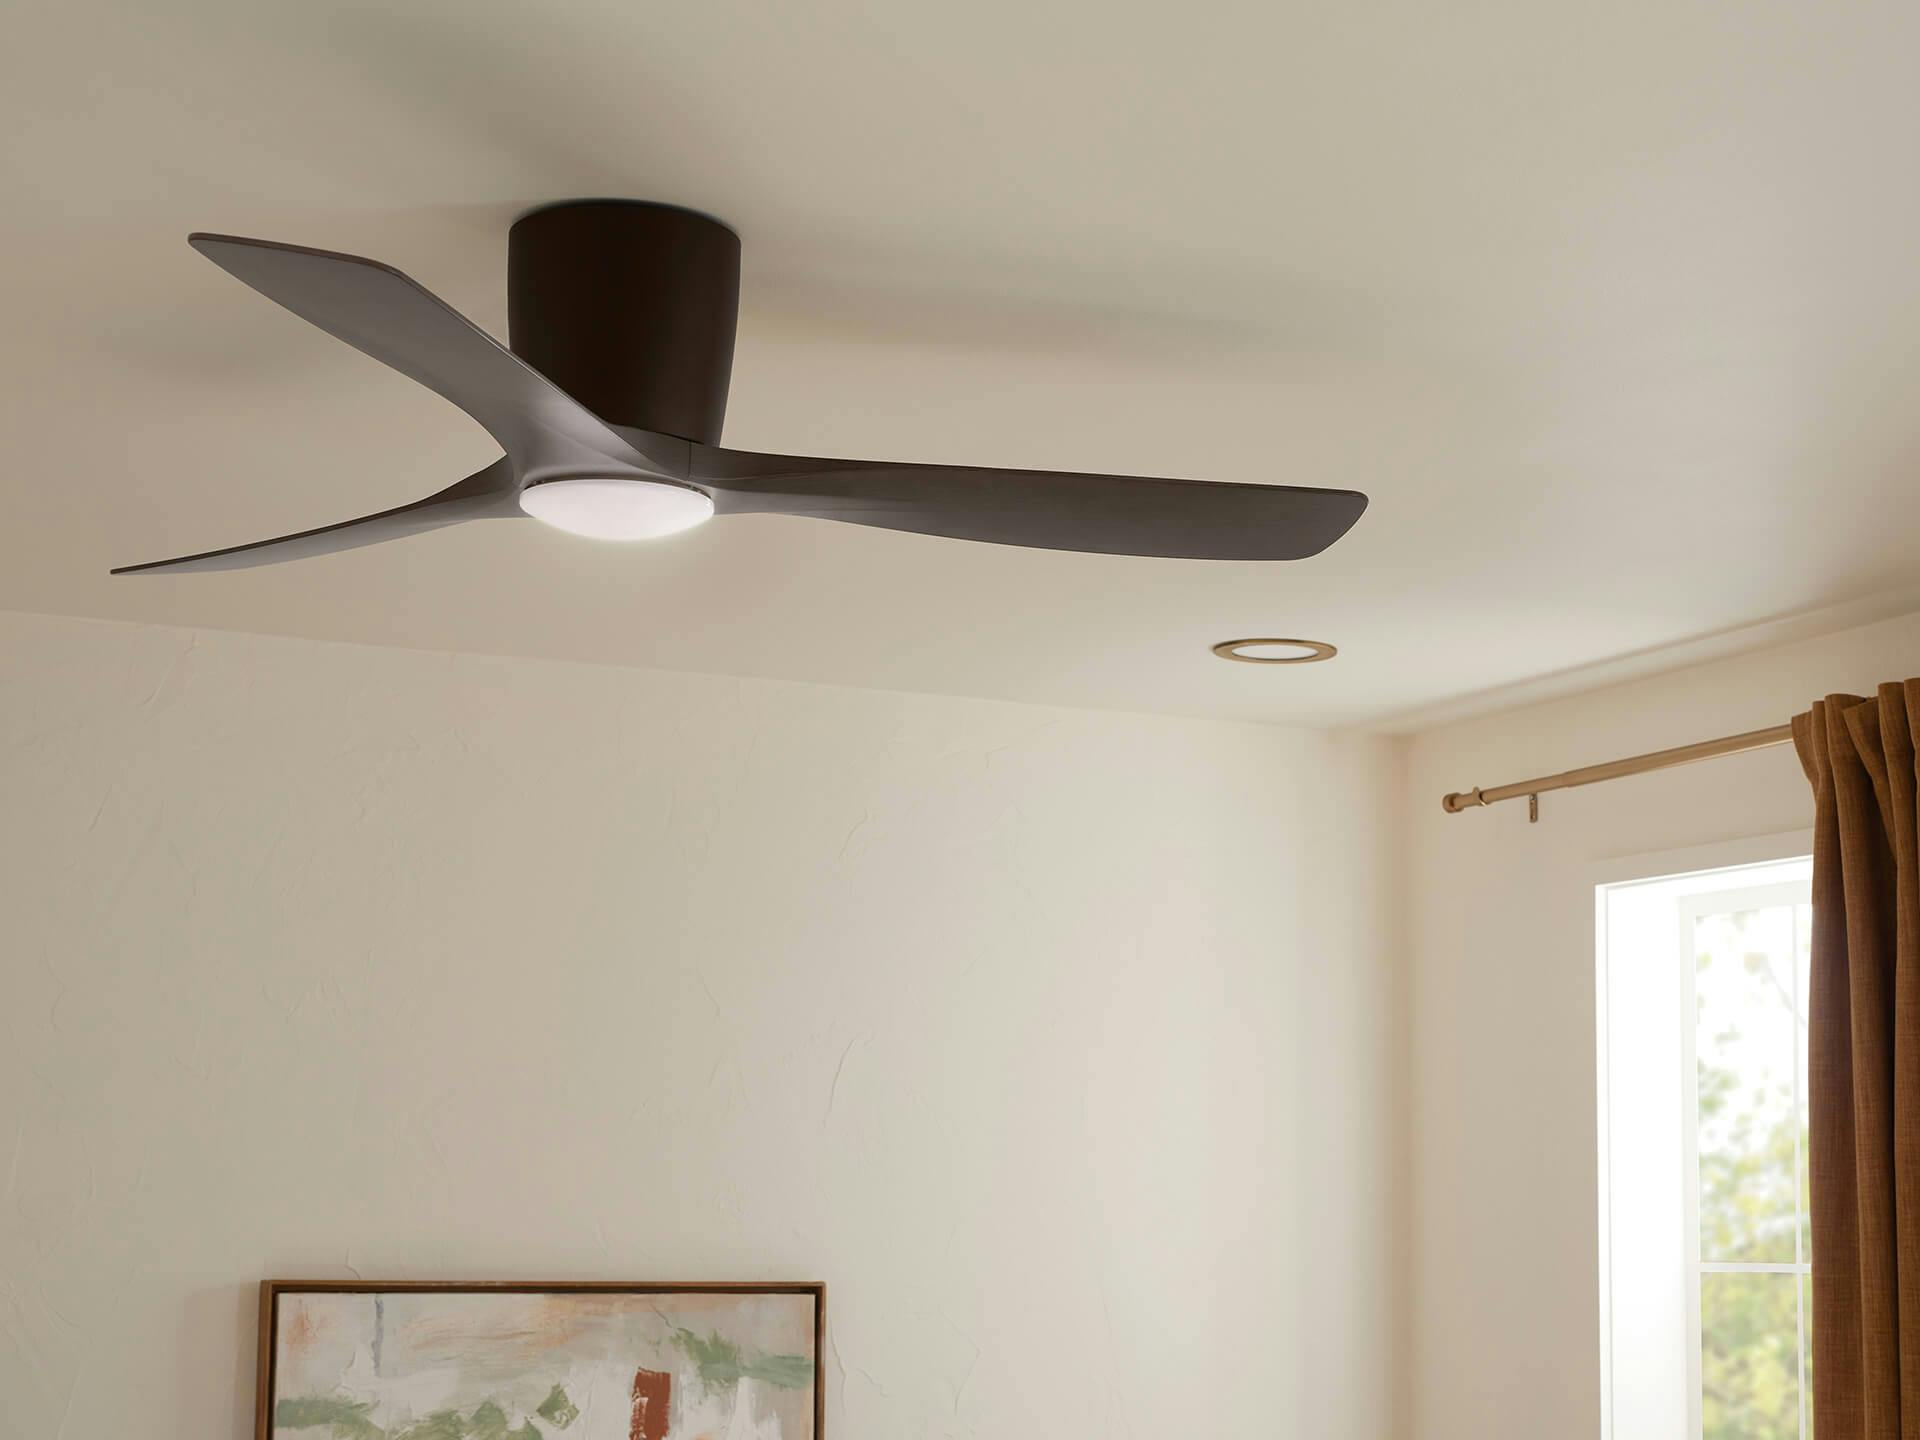 Close up of a volos ceiling fan in a living room during the day